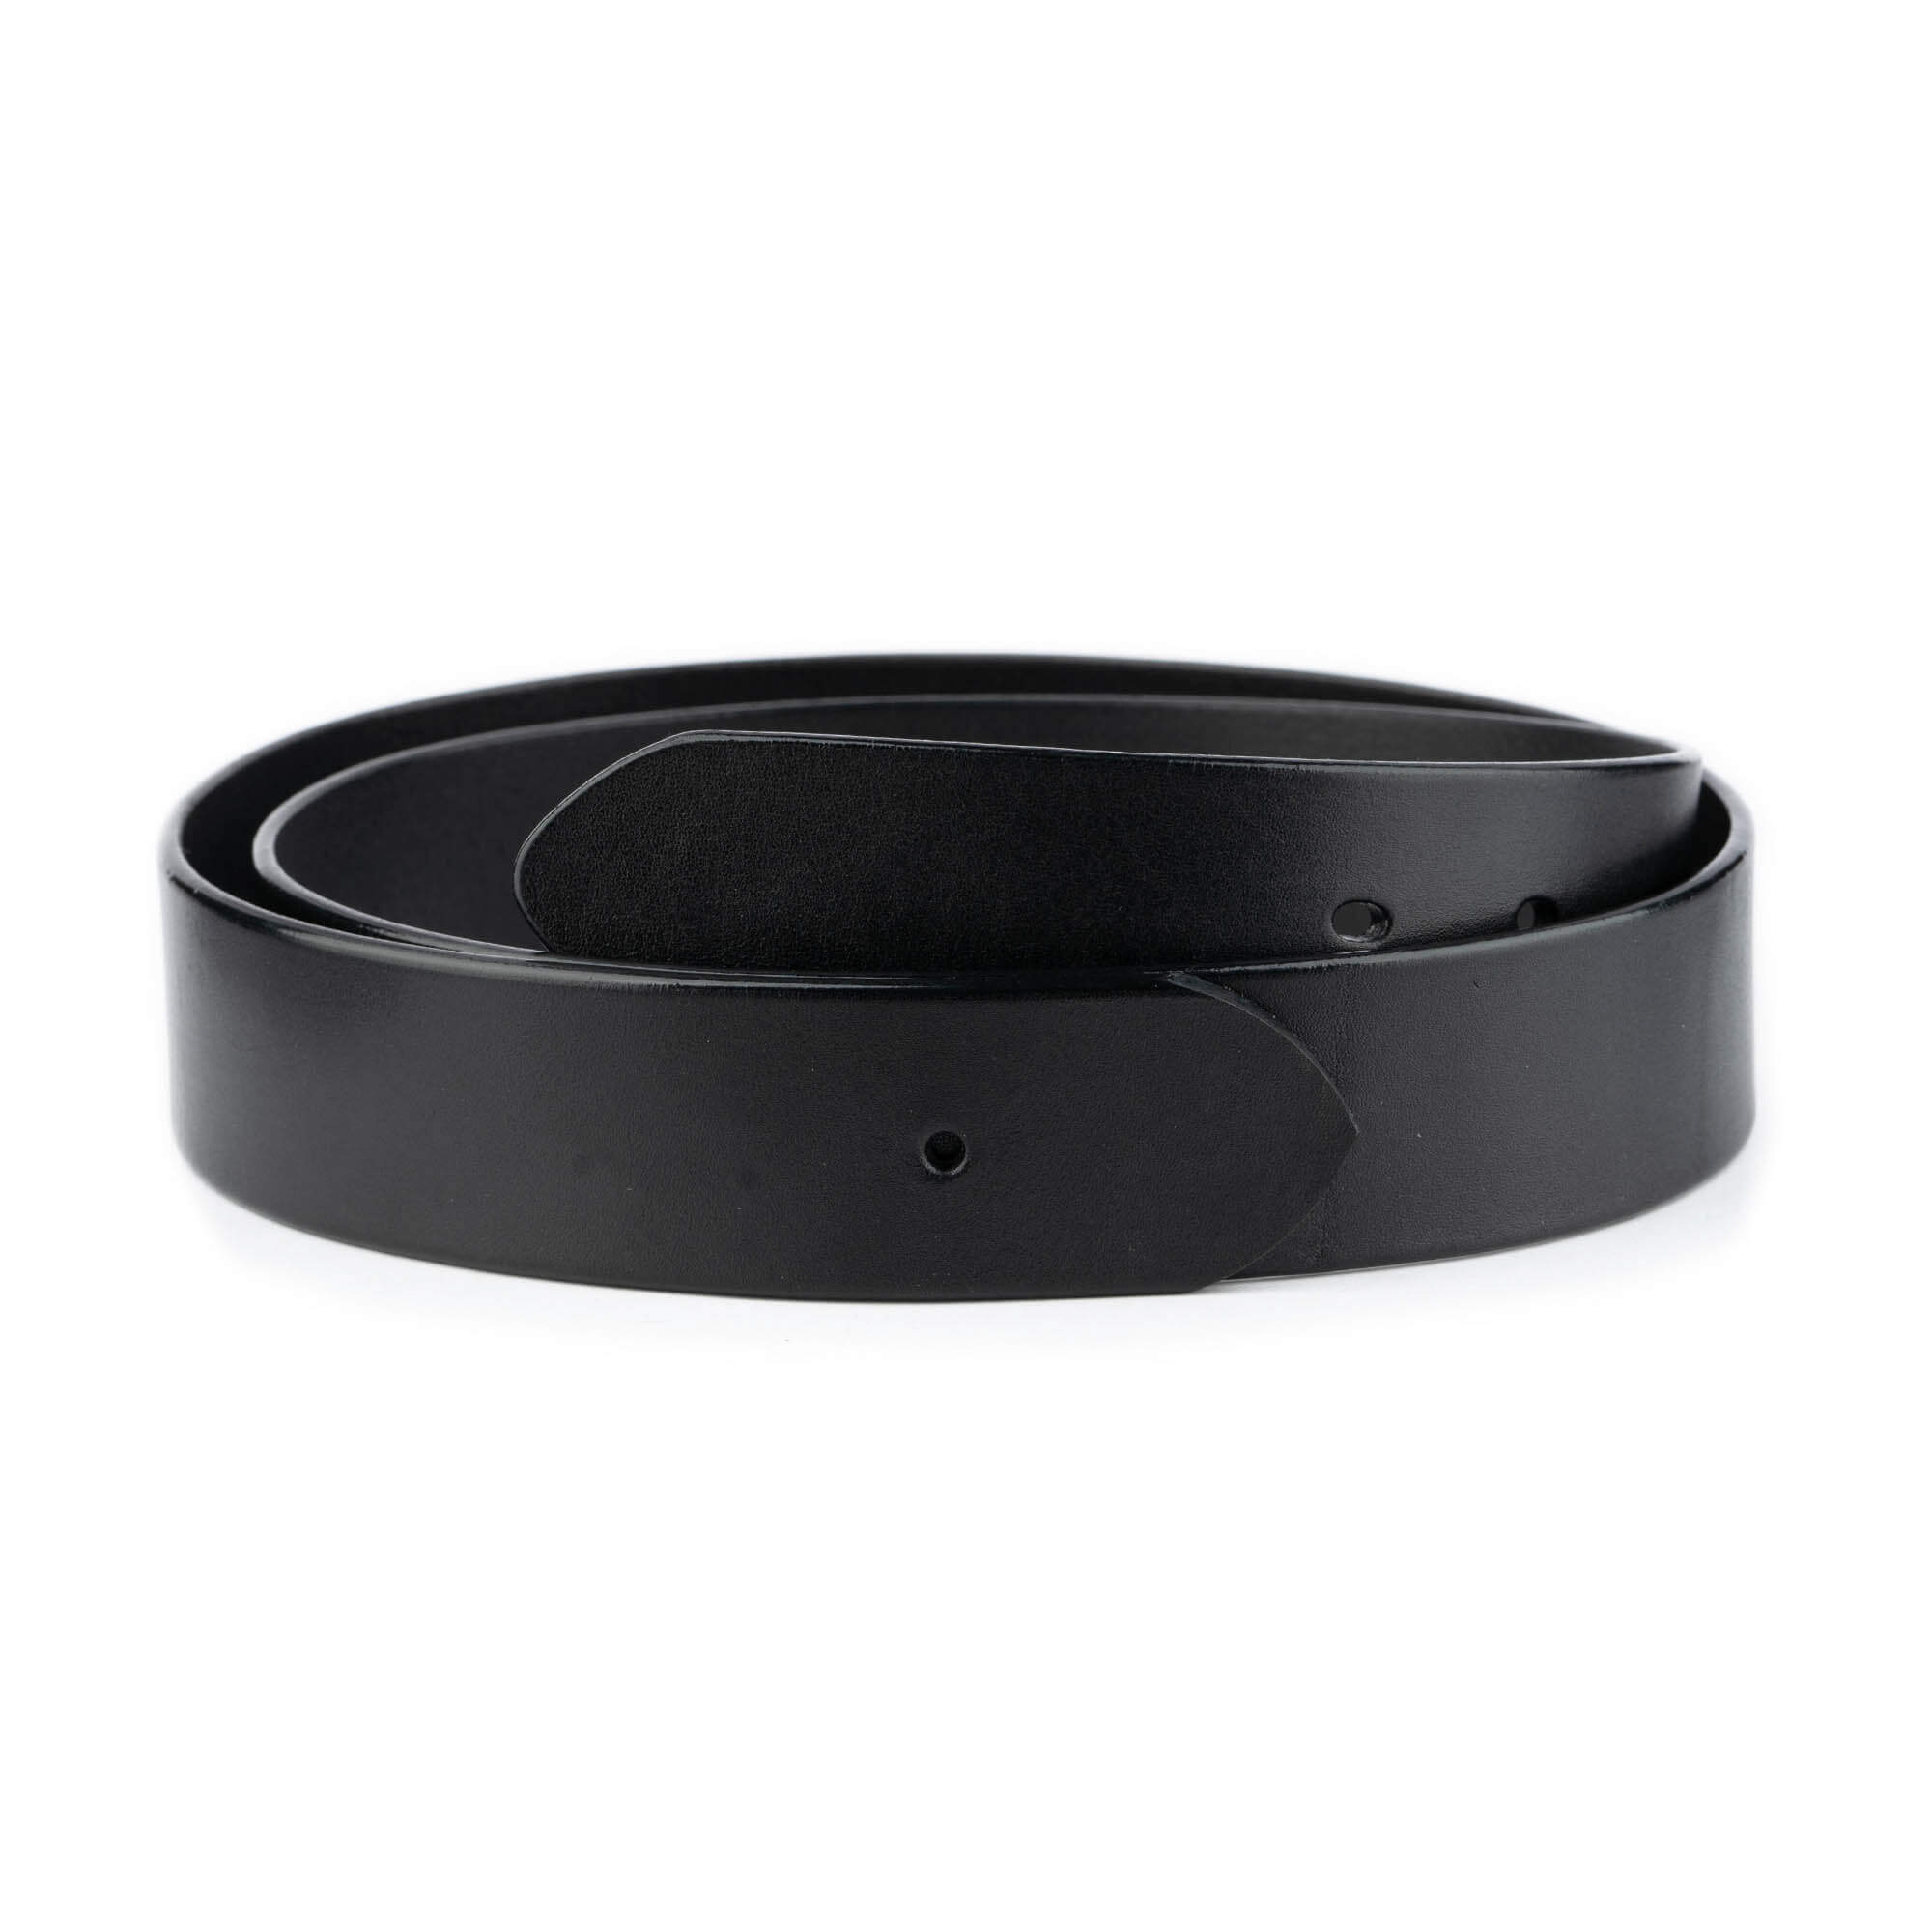 Buy Black Wide Leather Strap For Belt - With Hole For Buckle